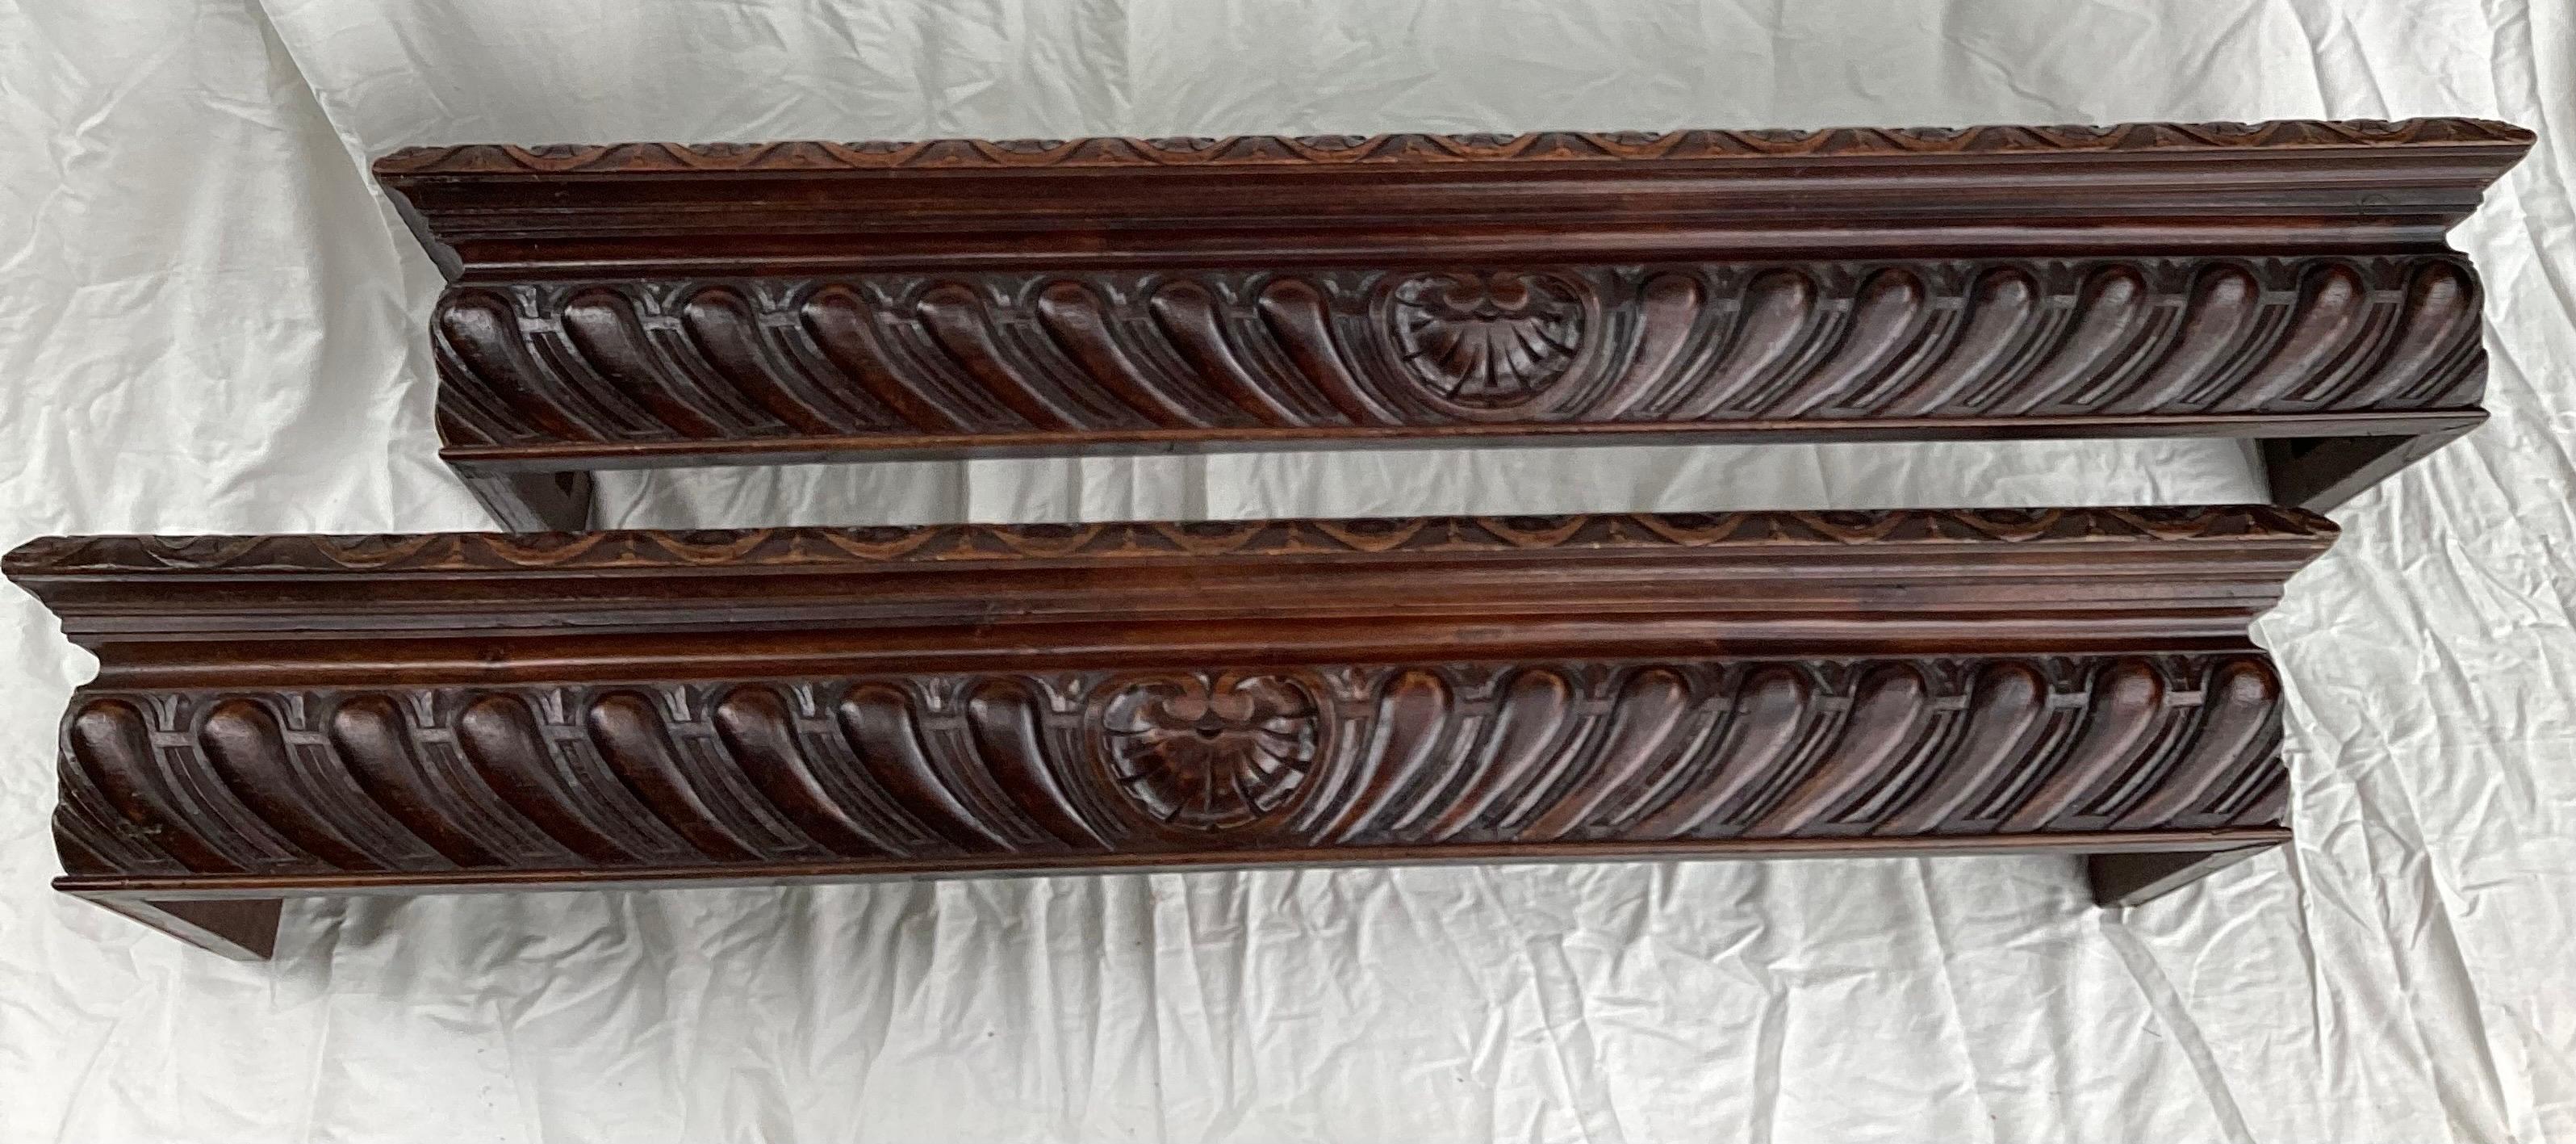 Get Pair of Carved Wood Window Cornices or Window Valances. Each is 54